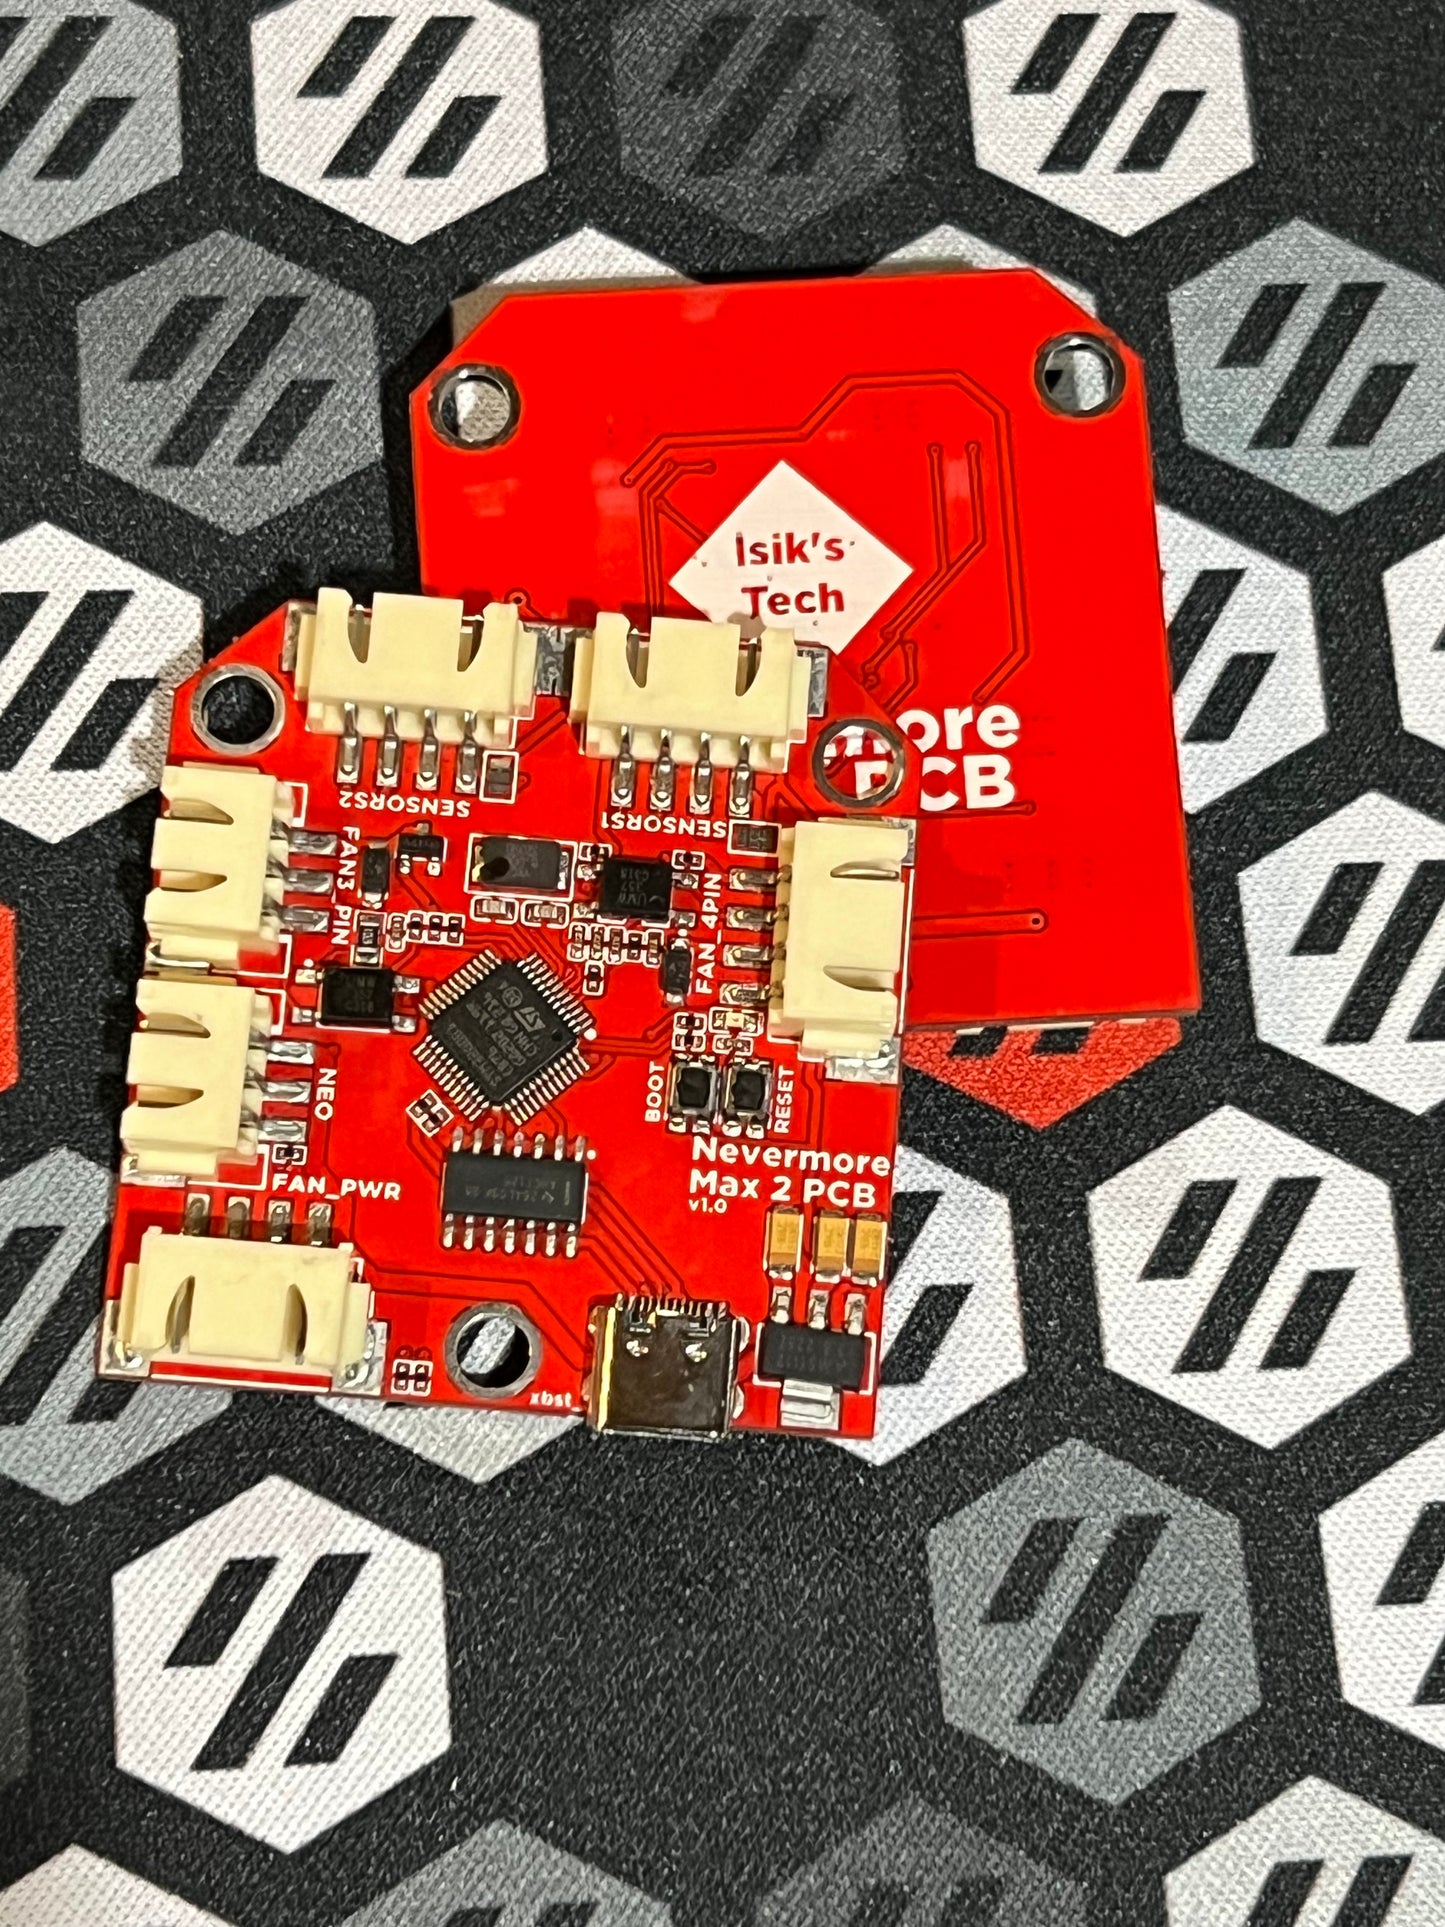 Nevermore Max 2 Red PCB by xbst_isik